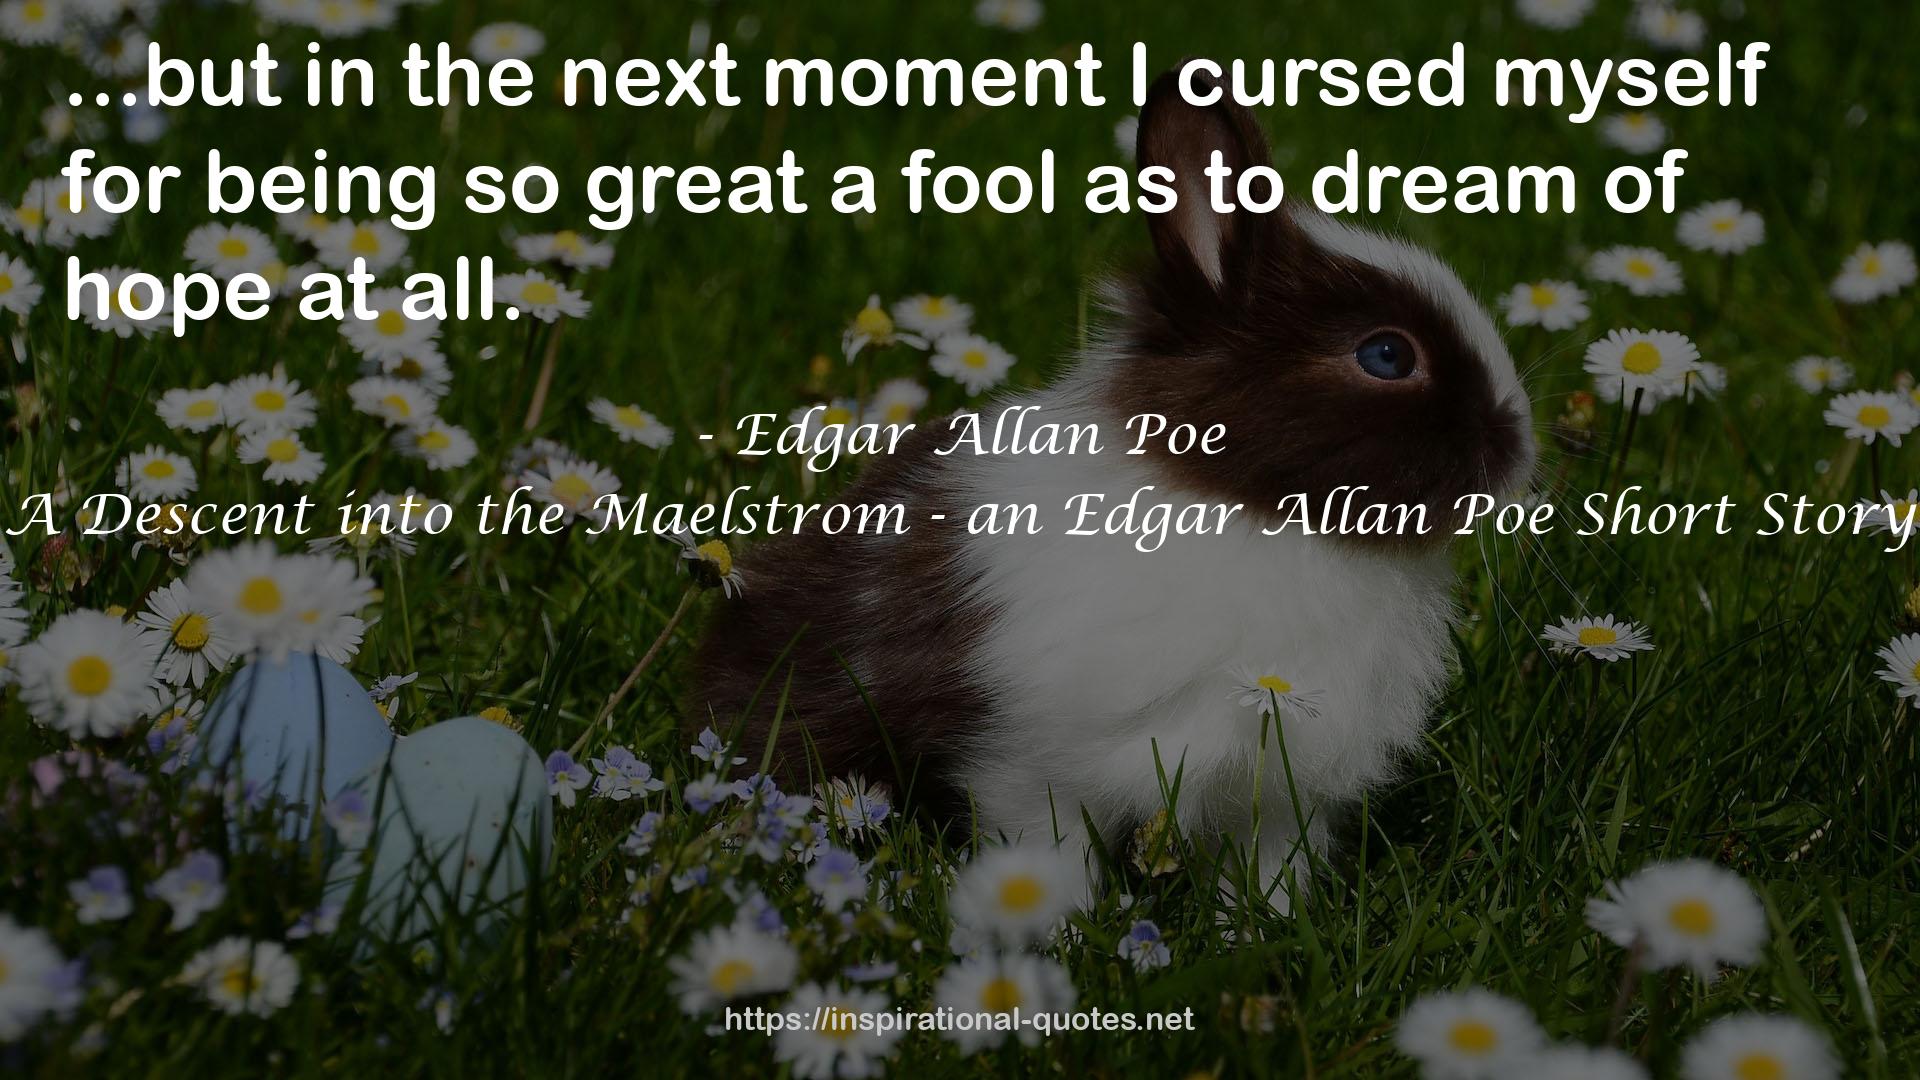 A Descent into the Maelstrom - an Edgar Allan Poe Short Story QUOTES